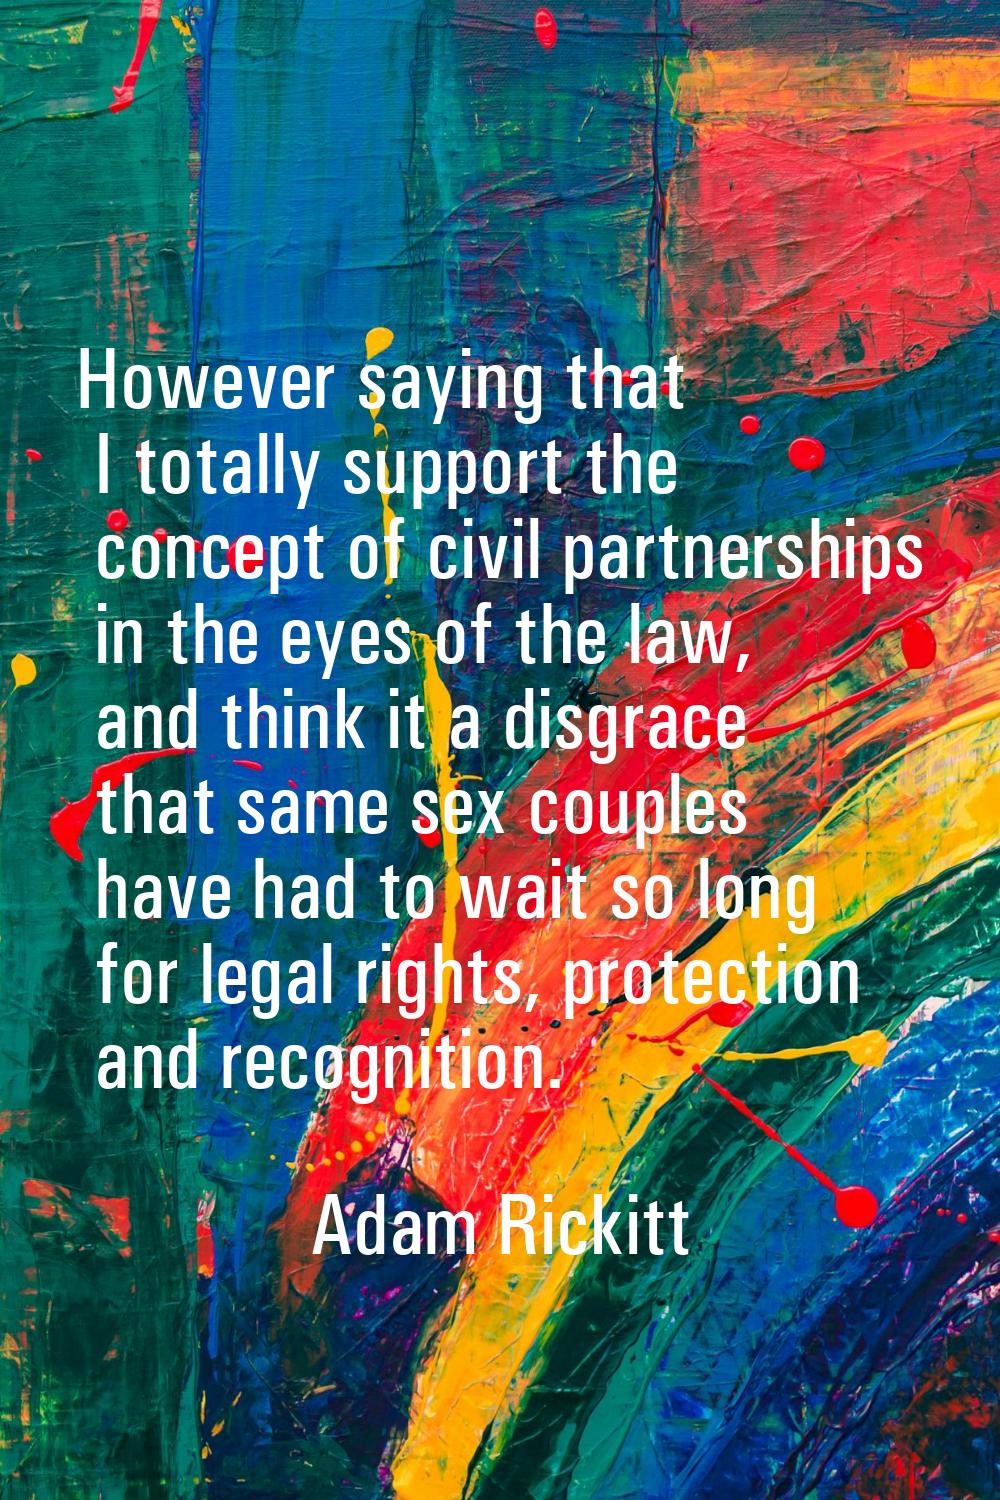 However saying that I totally support the concept of civil partnerships in the eyes of the law, and